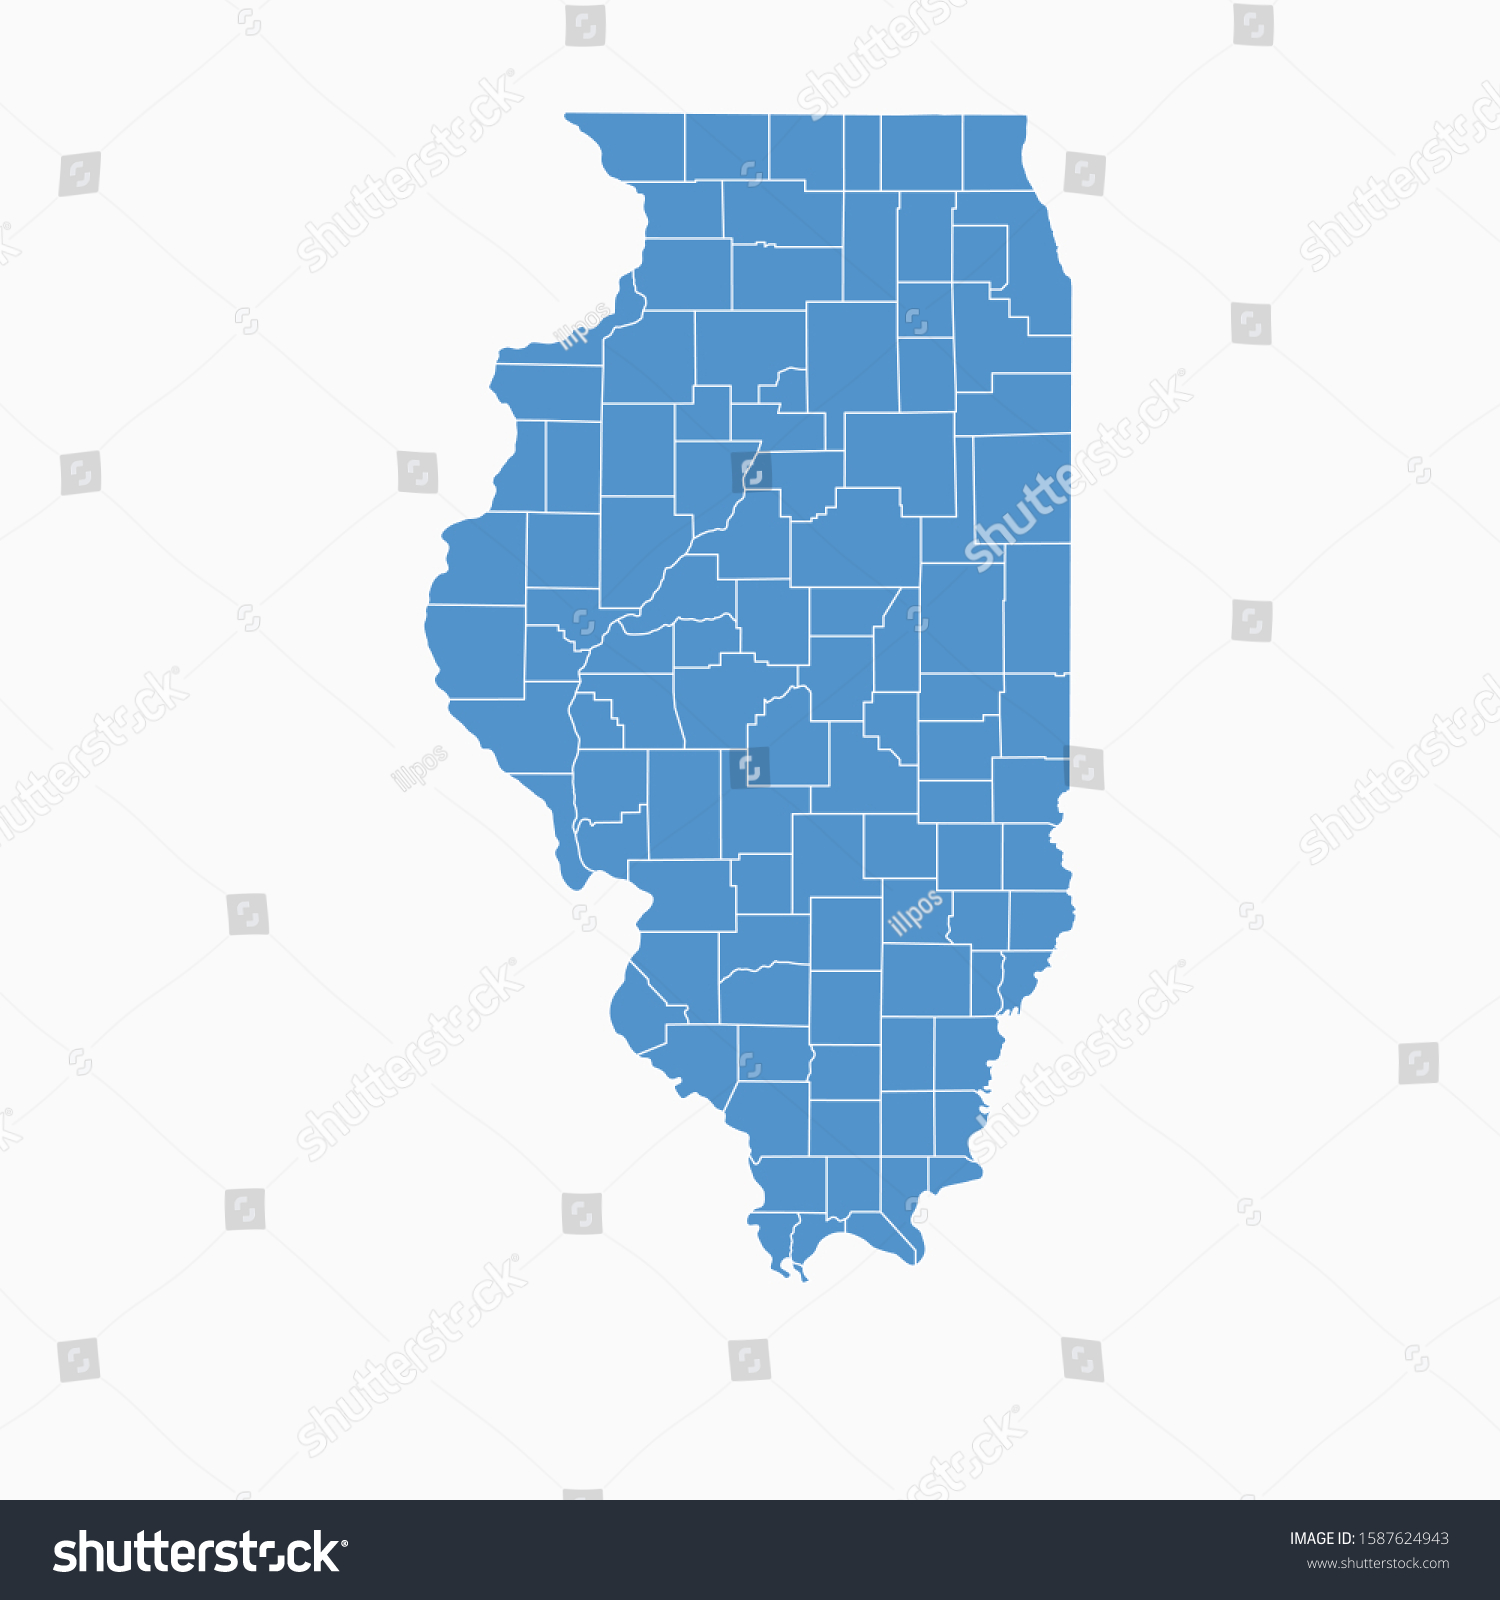 SVG of Illinois map blue color. USA state Illinois map icon. Illinois vector modern map. Vector illustration EPS10 svg